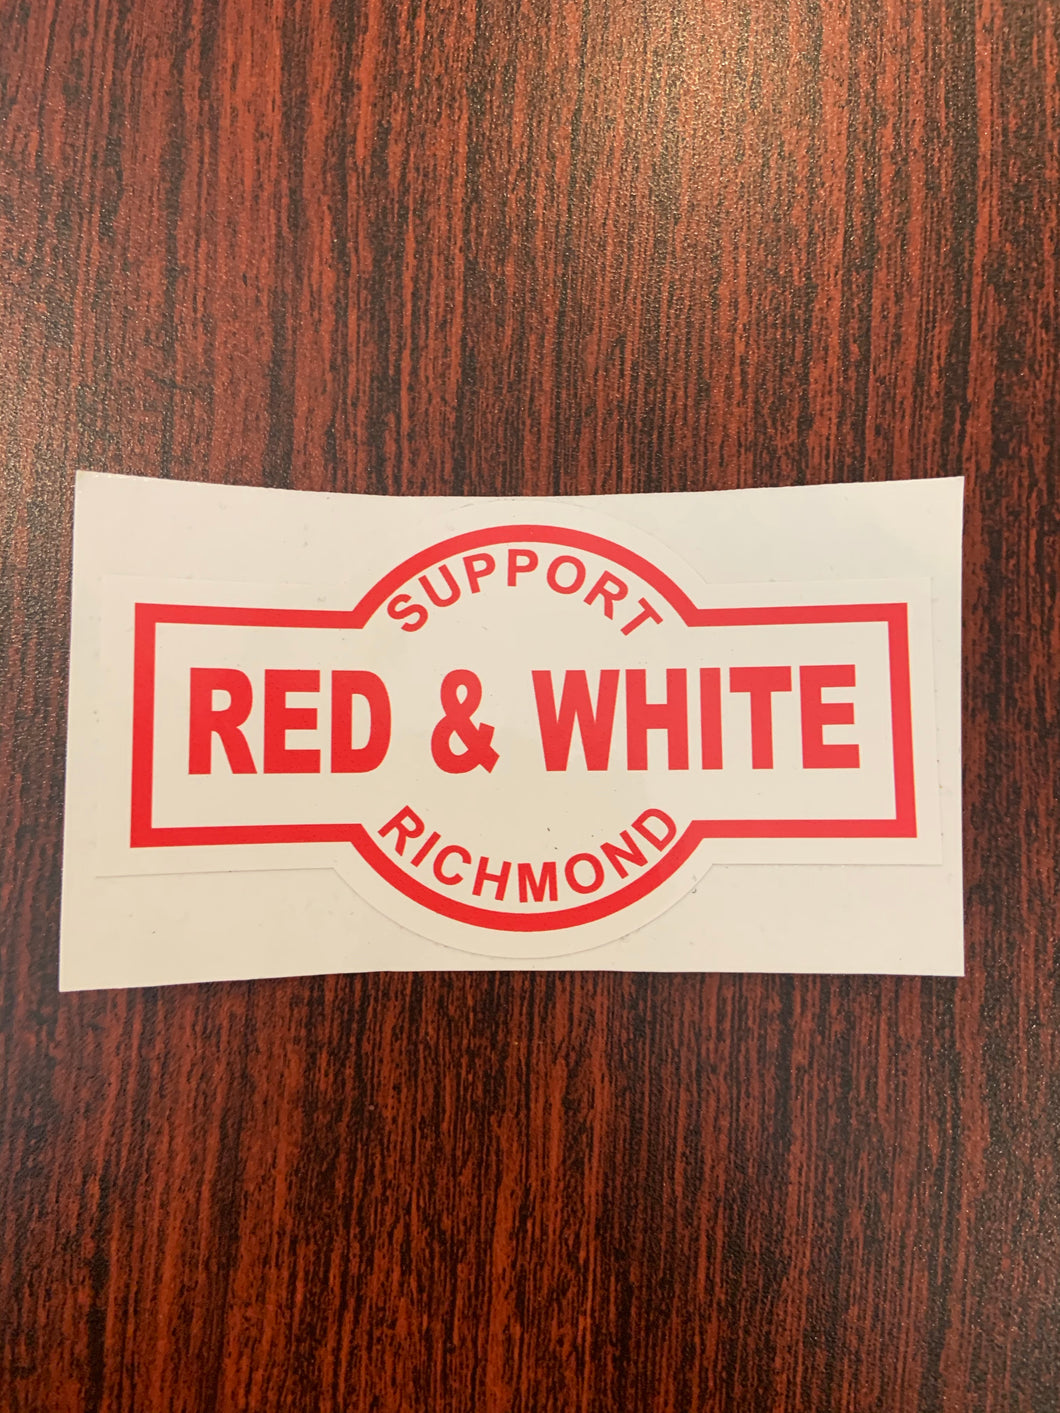 Support red and white richmond